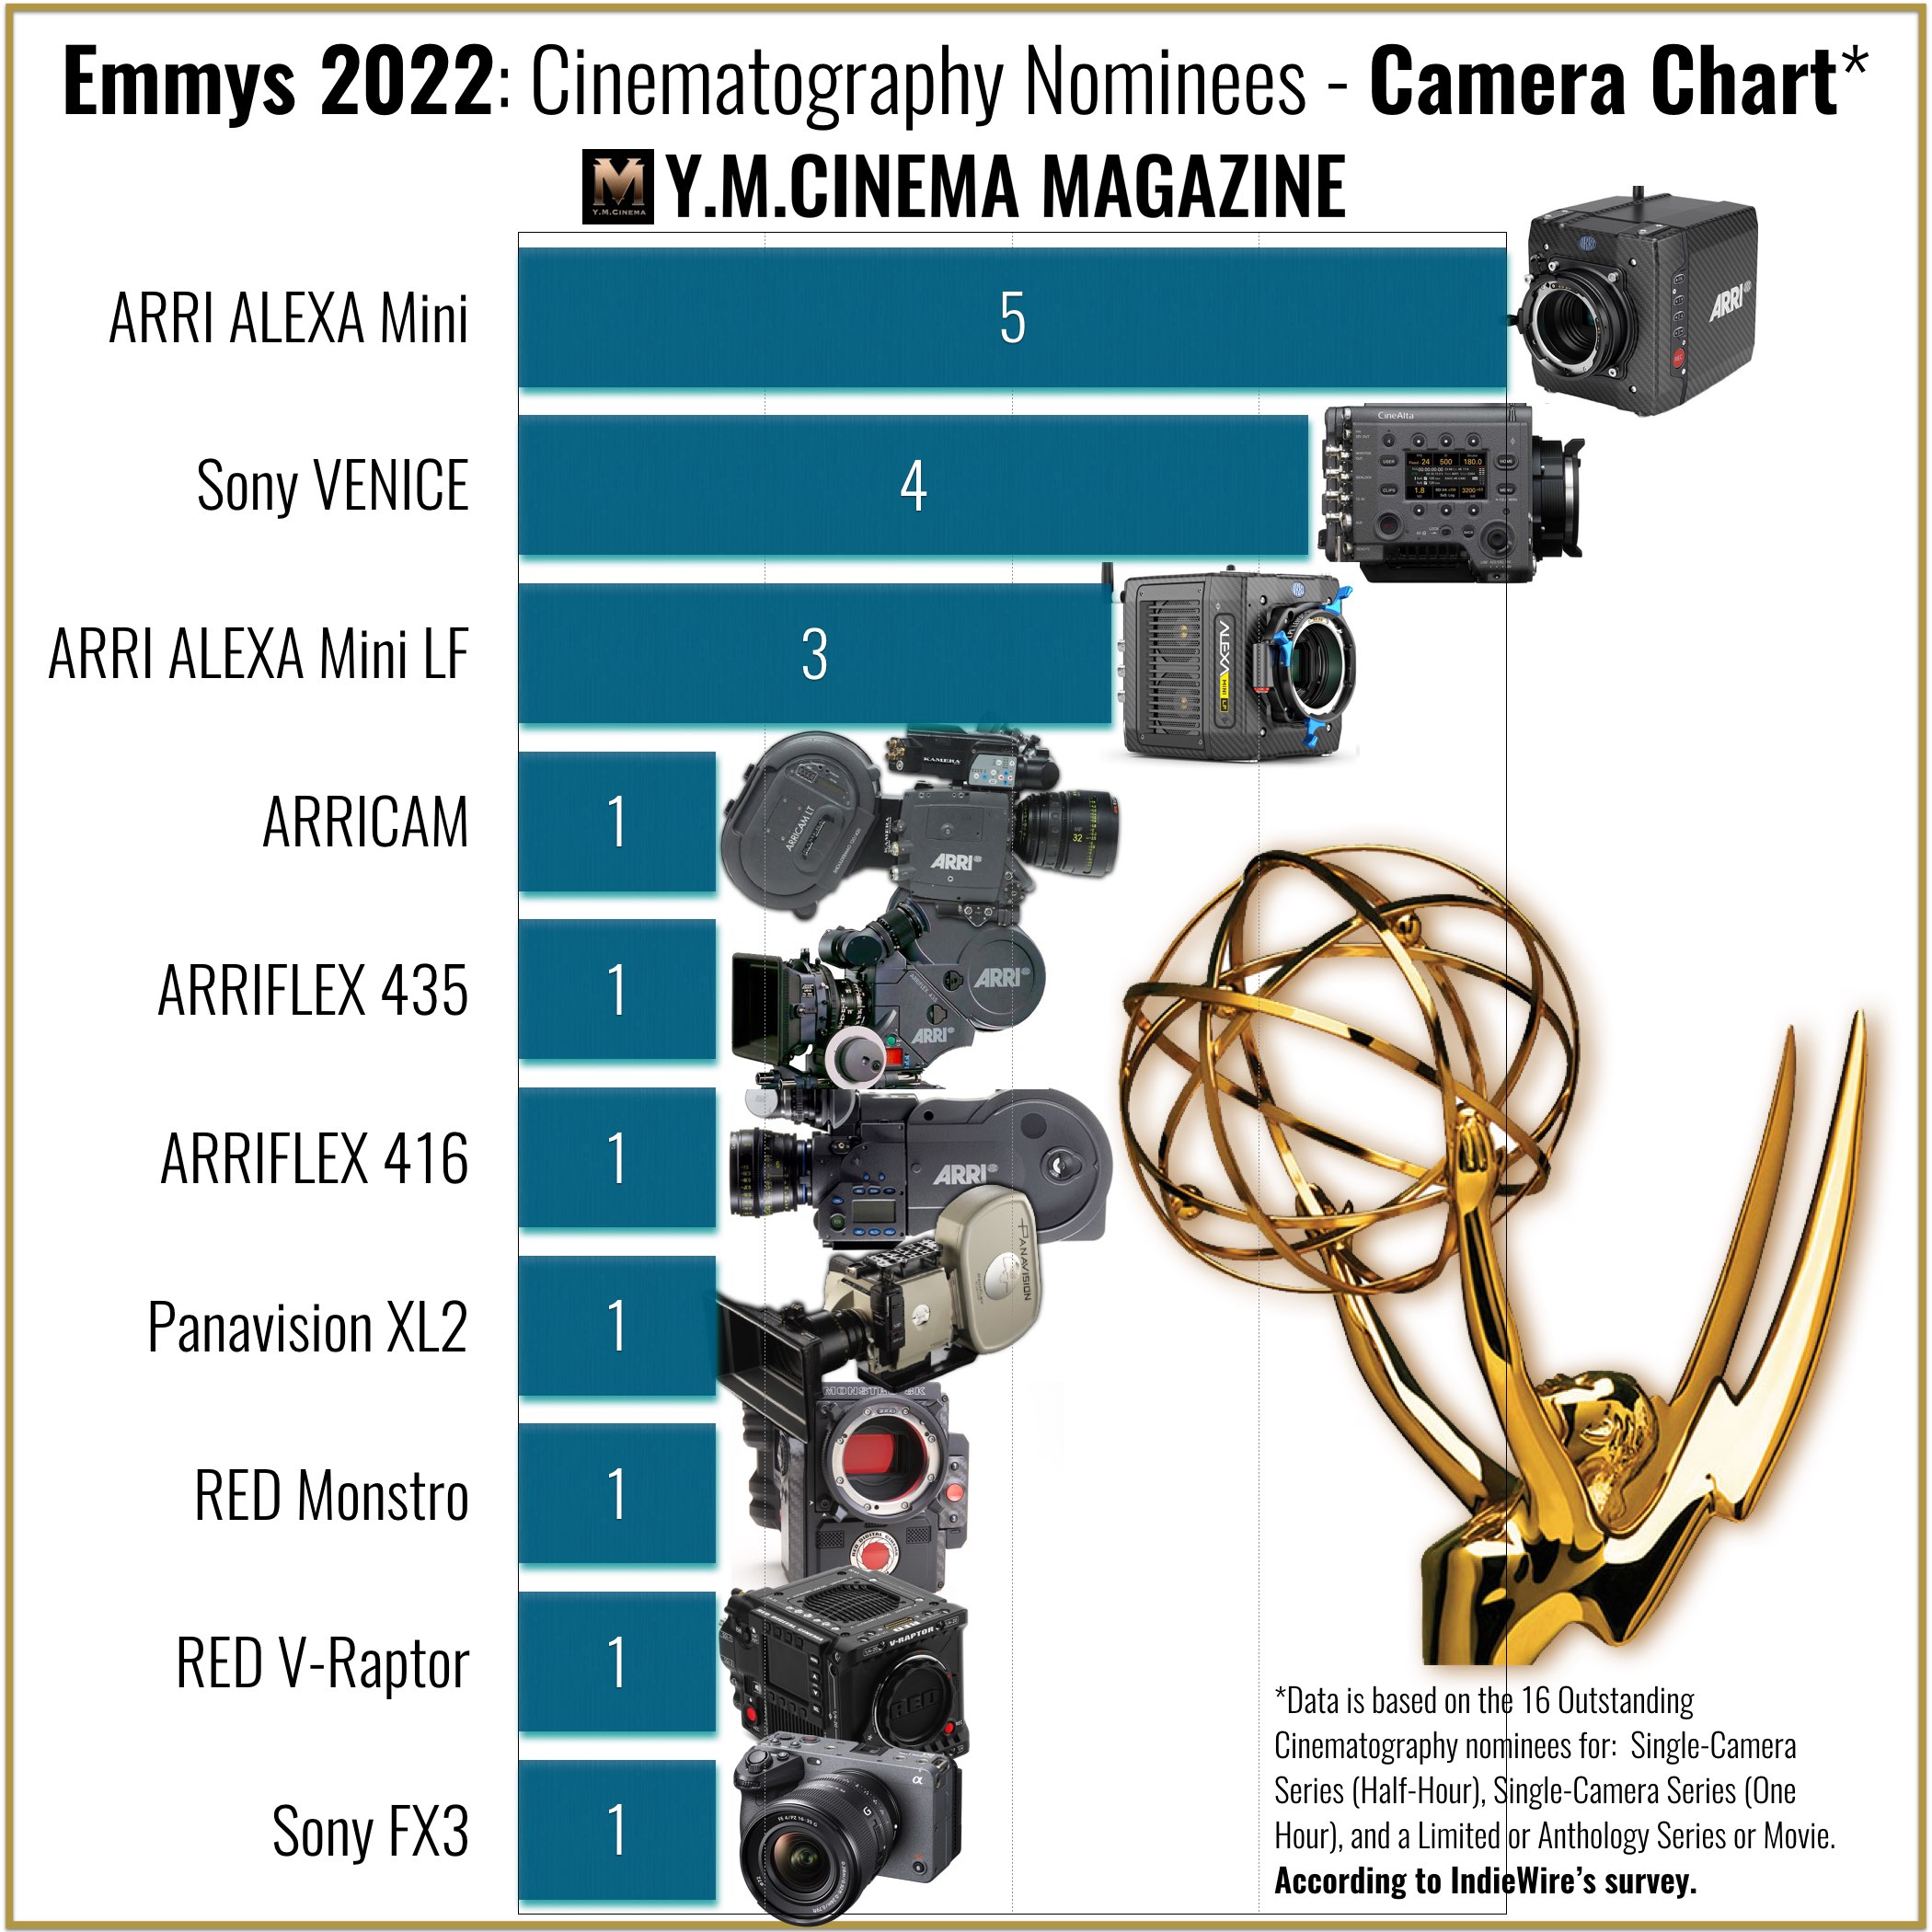 Emmys 2022: Cinematography nominees - Camera chart